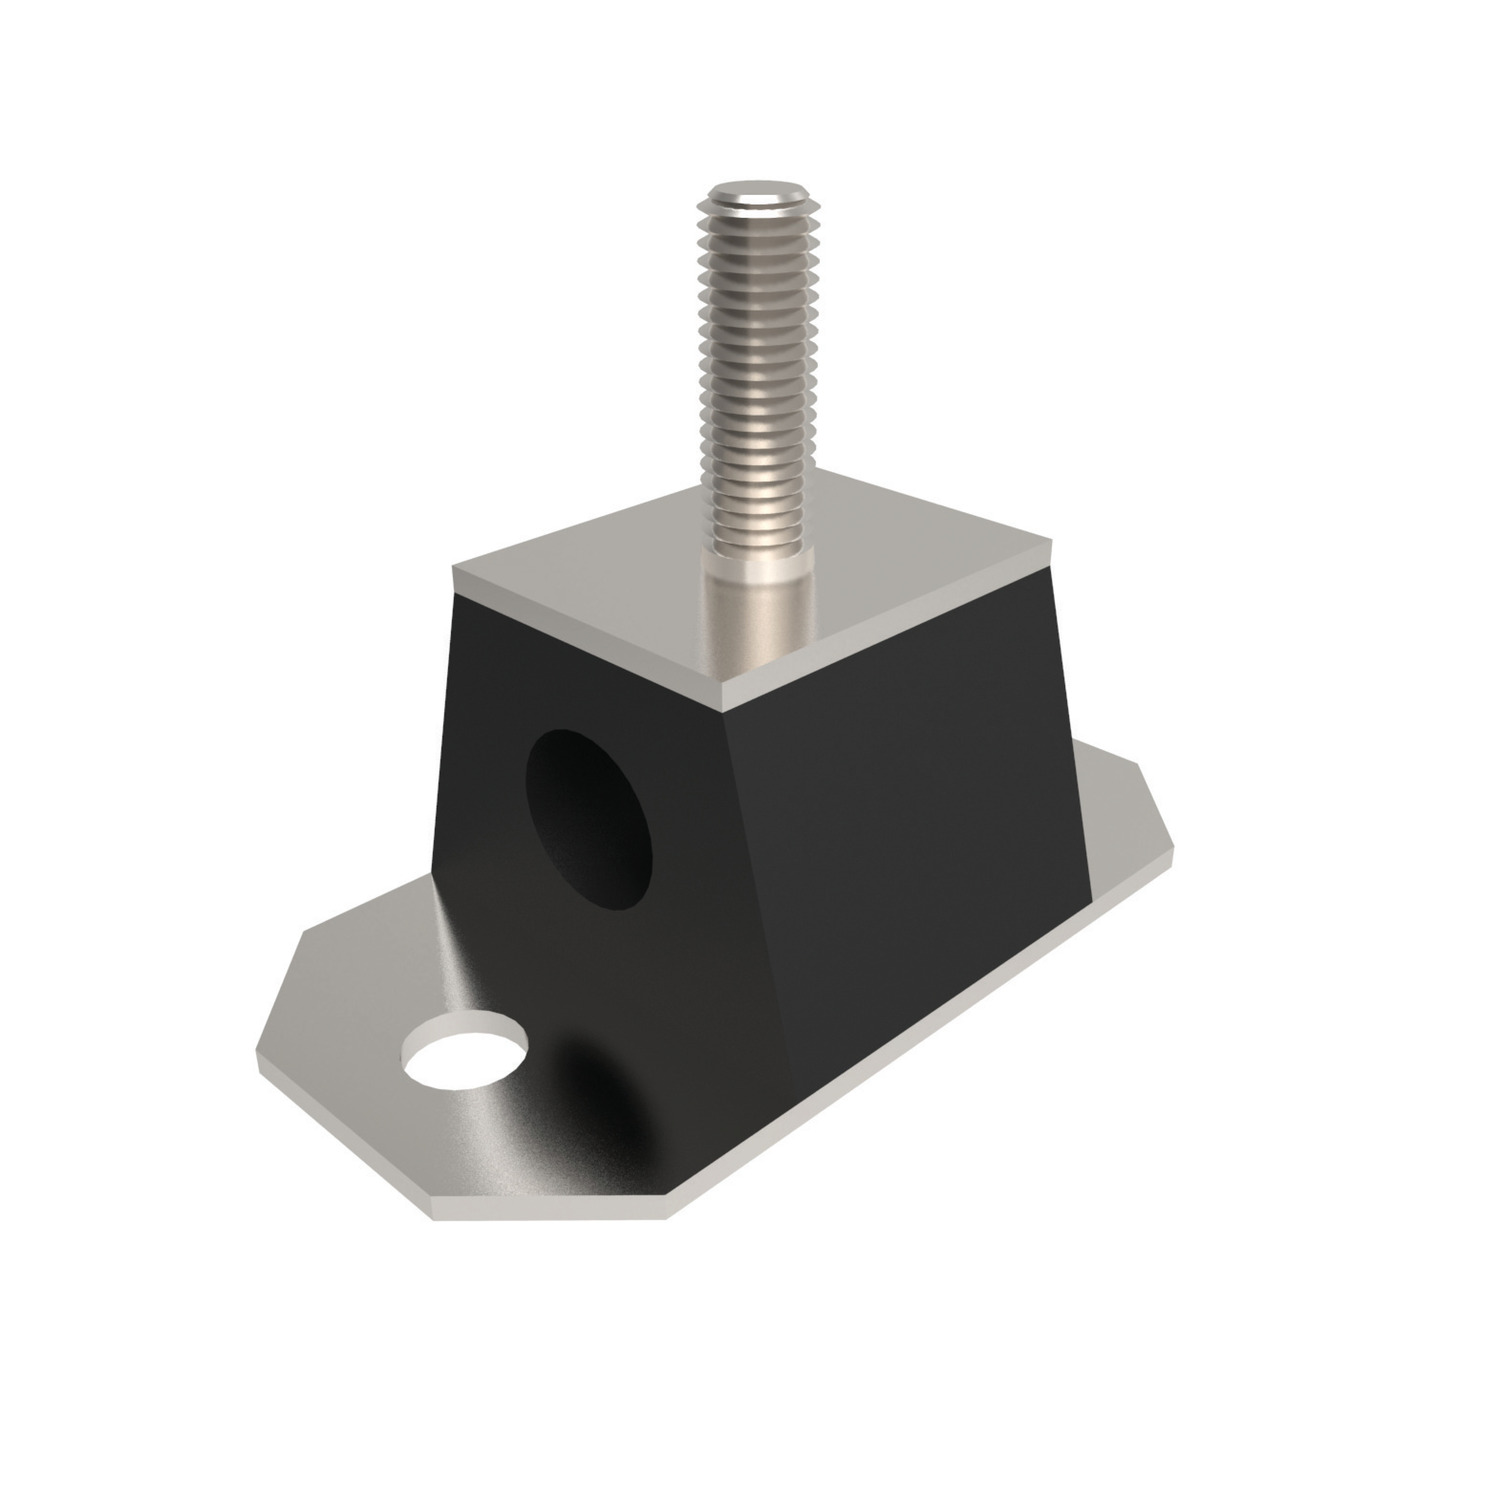 Product P2044, Anti-vibration Mounts with through holes / 